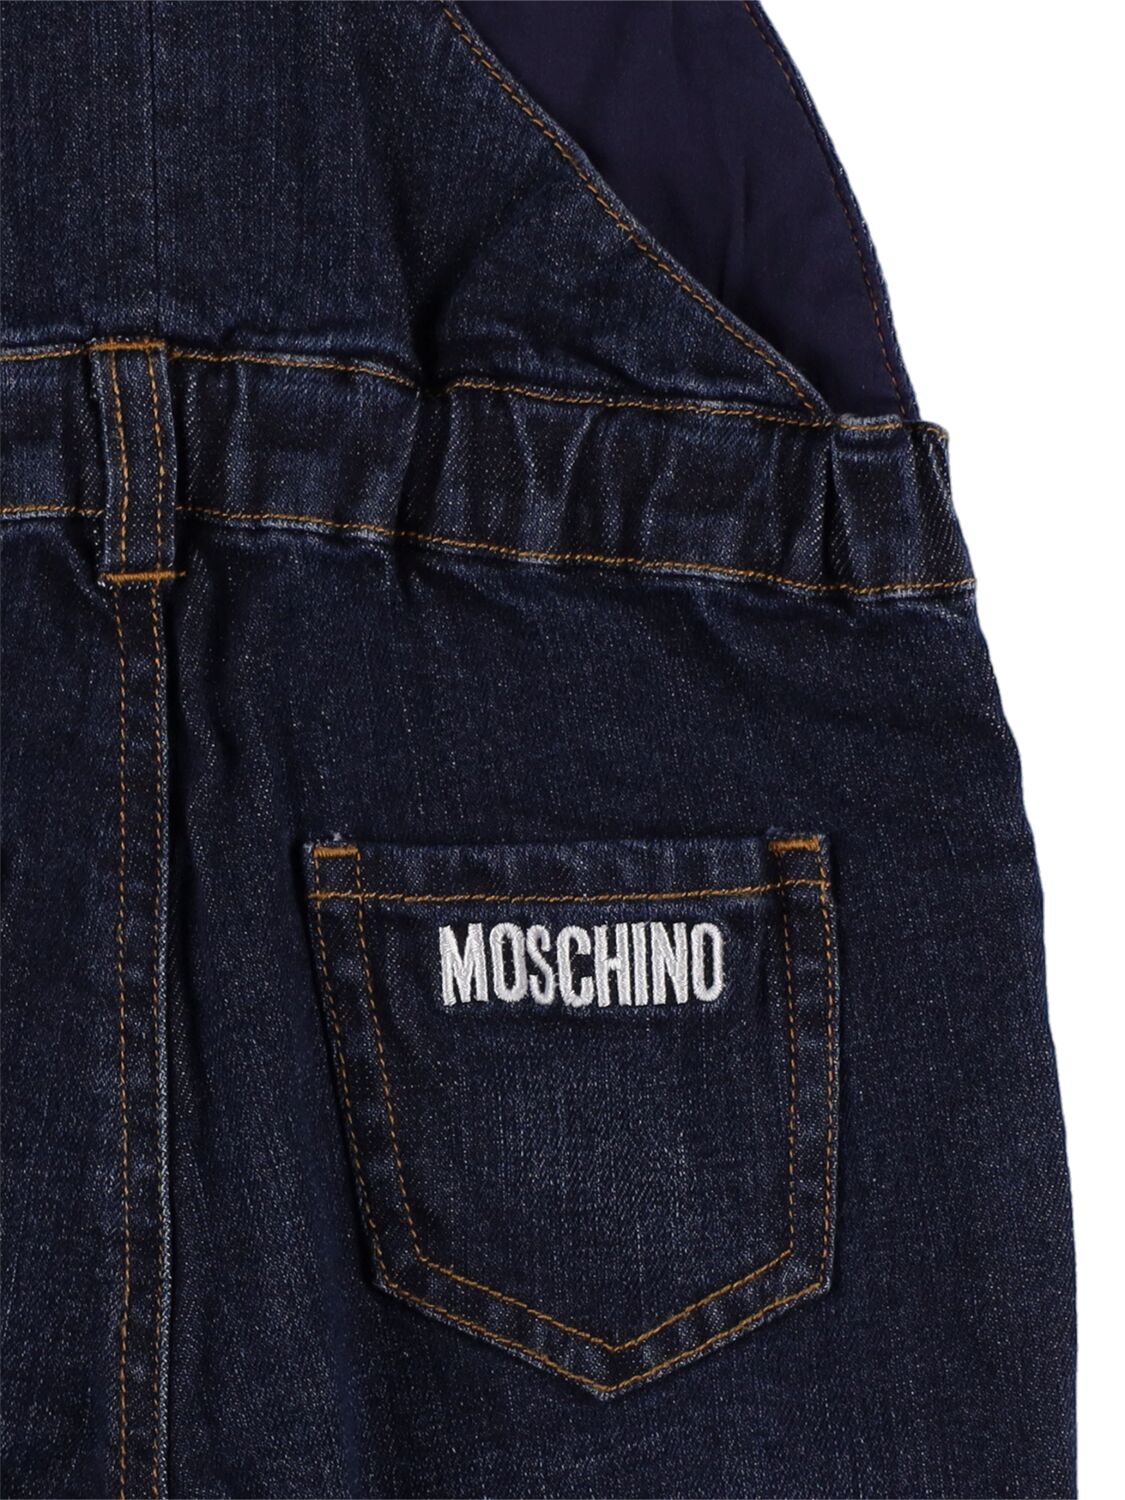 Shop Moschino Cotton Jersey T-shirt & Denim Overalls In Red